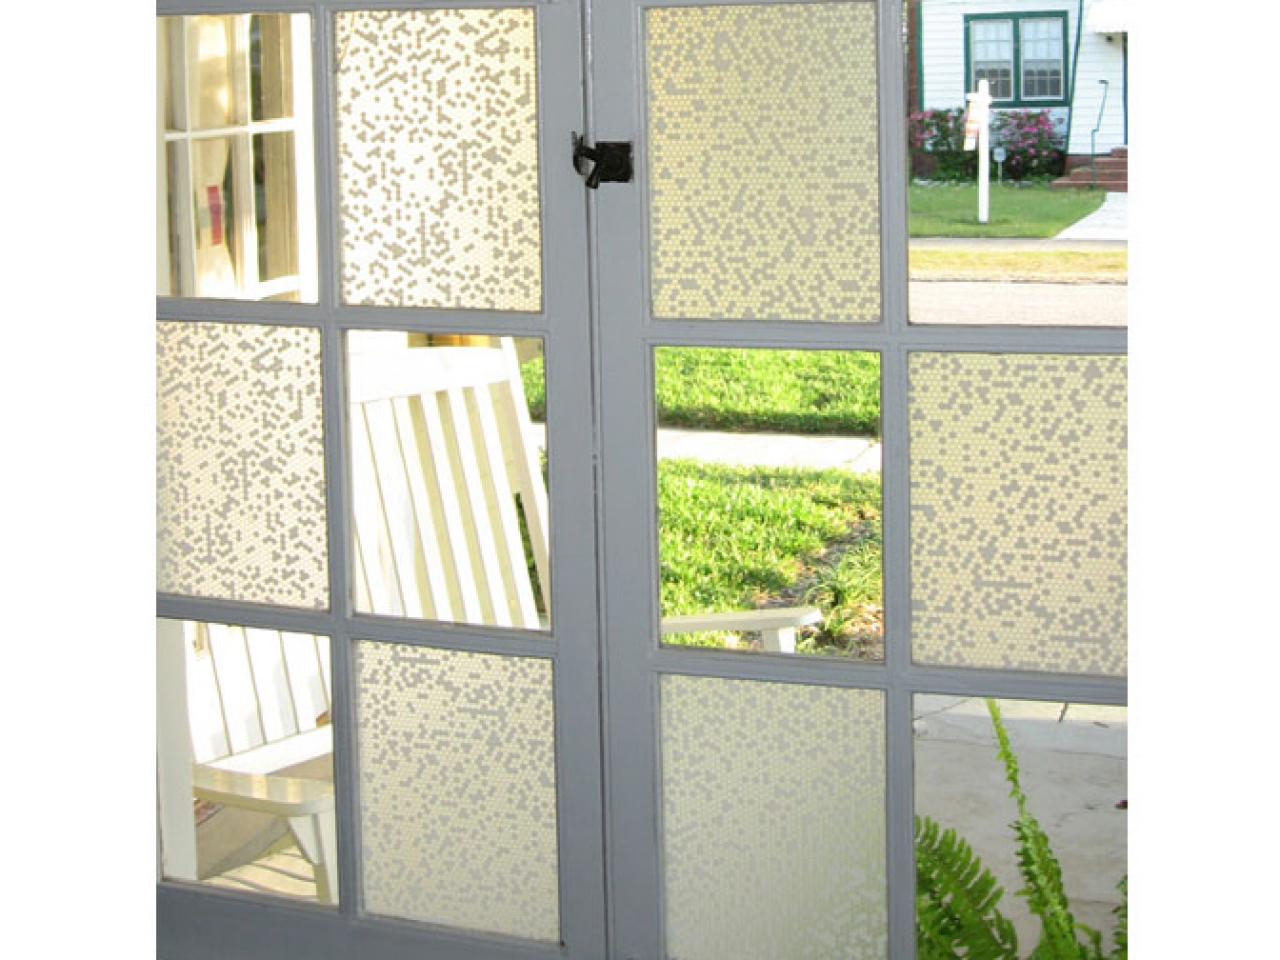 Window Film Can Make Your House More Beautiful And Save Money DIY